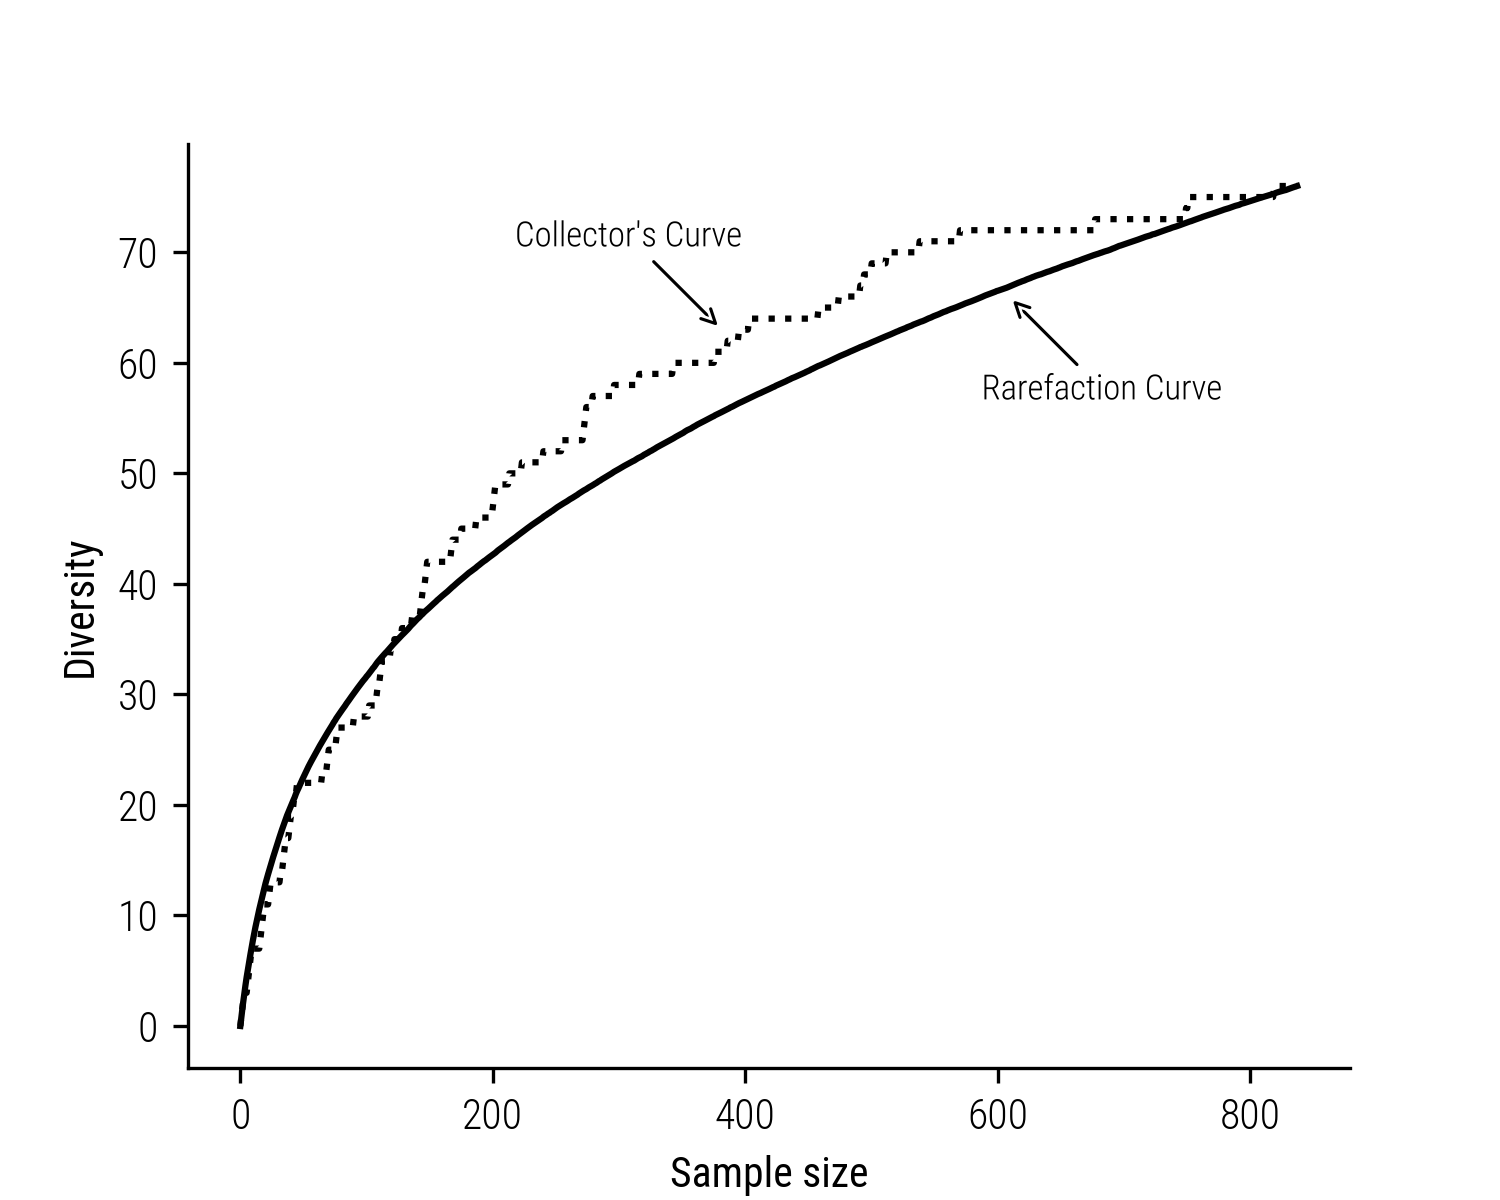 Figure 1: Fictional collector&rsquo;s curve and its corresponding rarefaction curve.